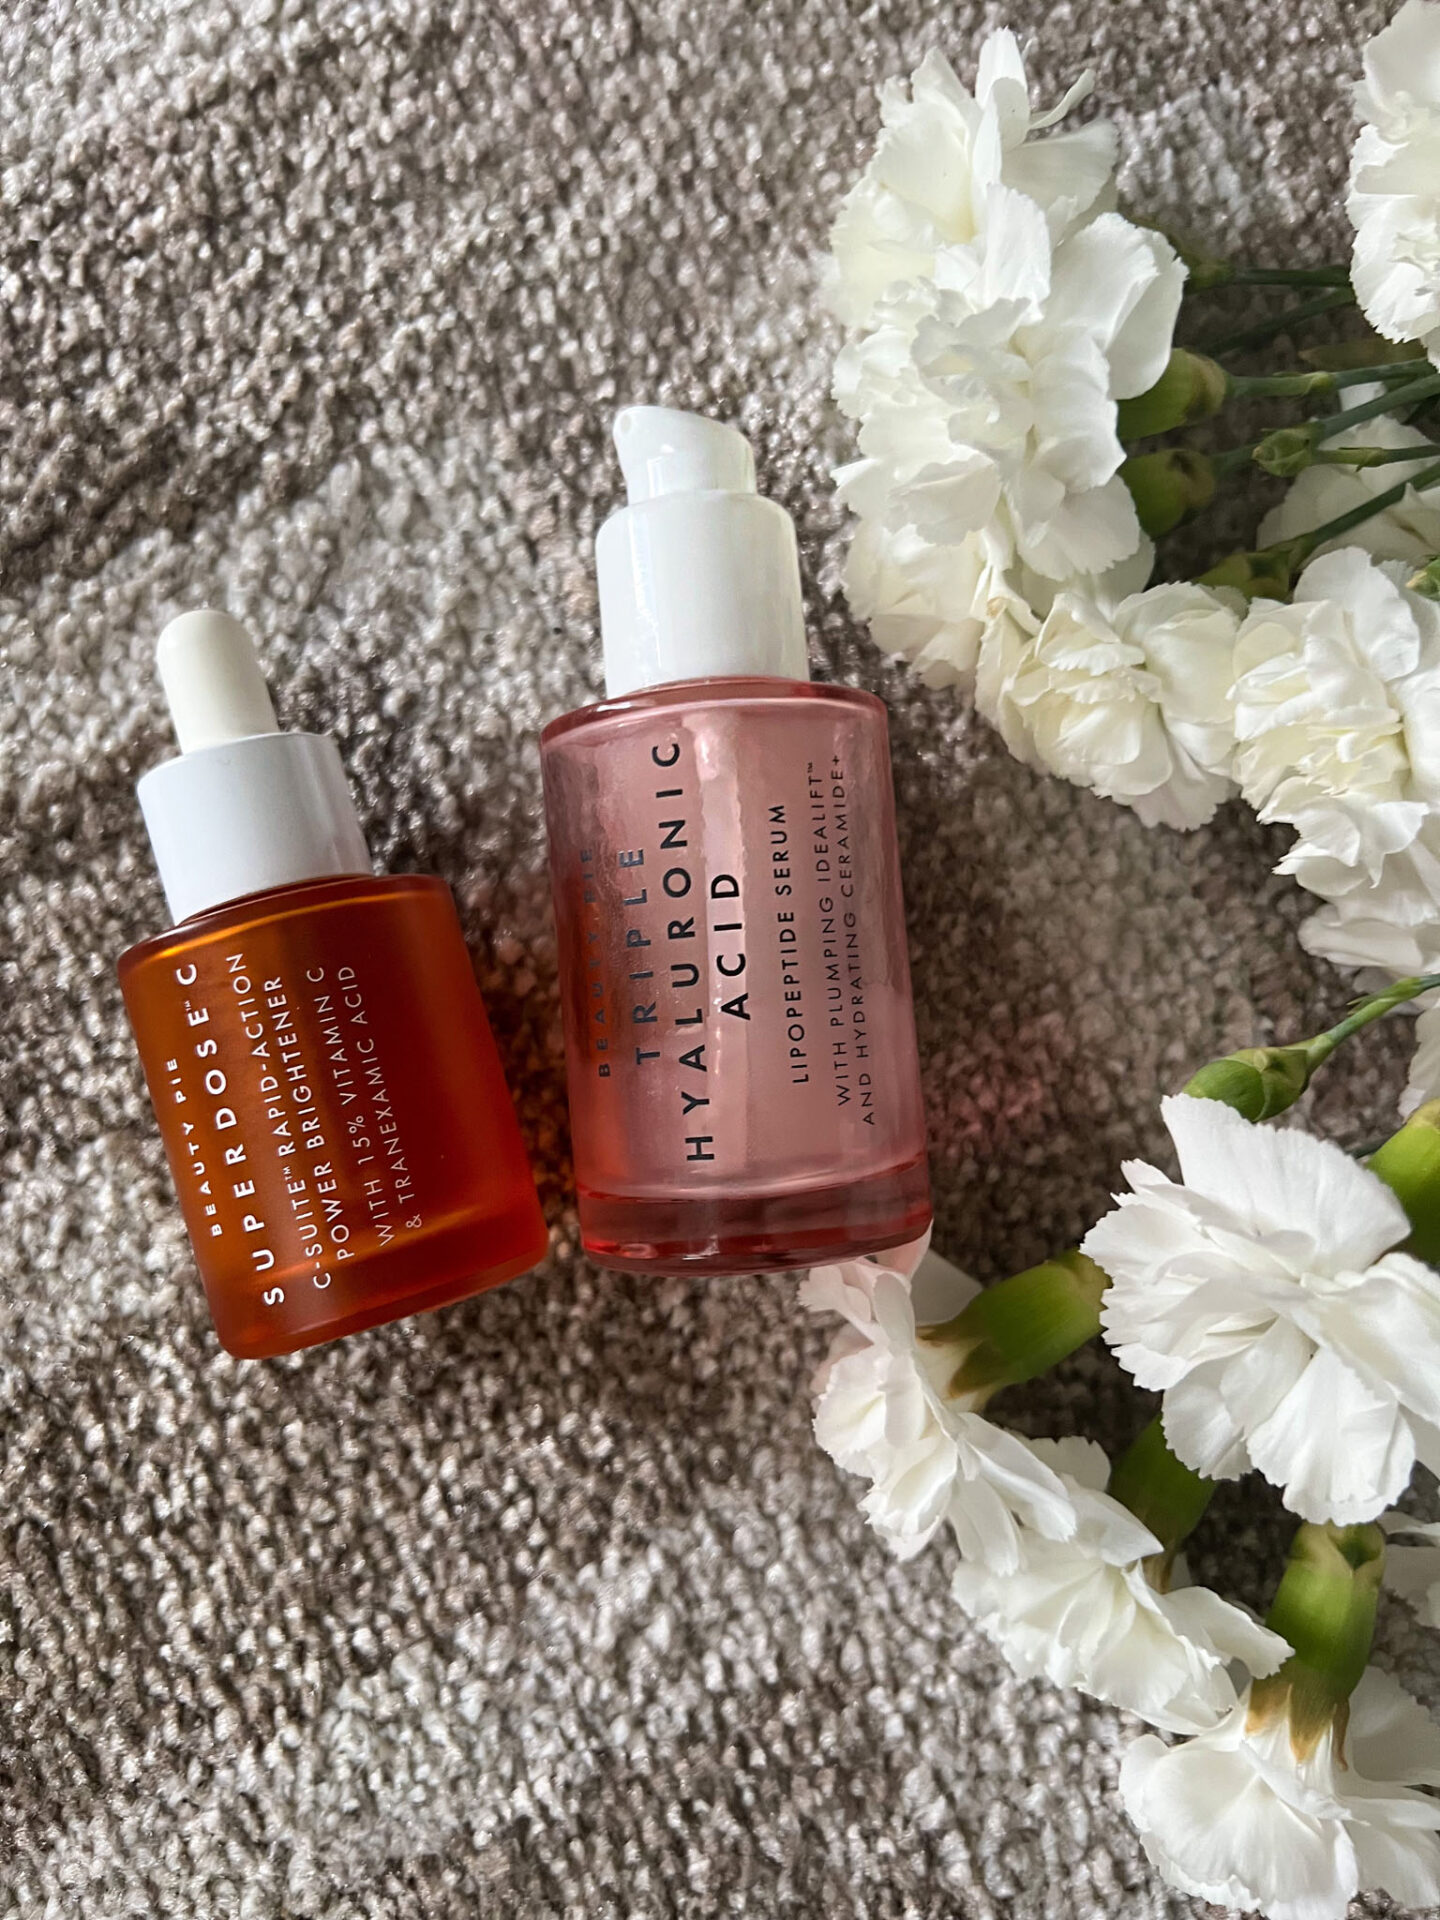 Dallas blogger review the Beauty Pie skincare products to try